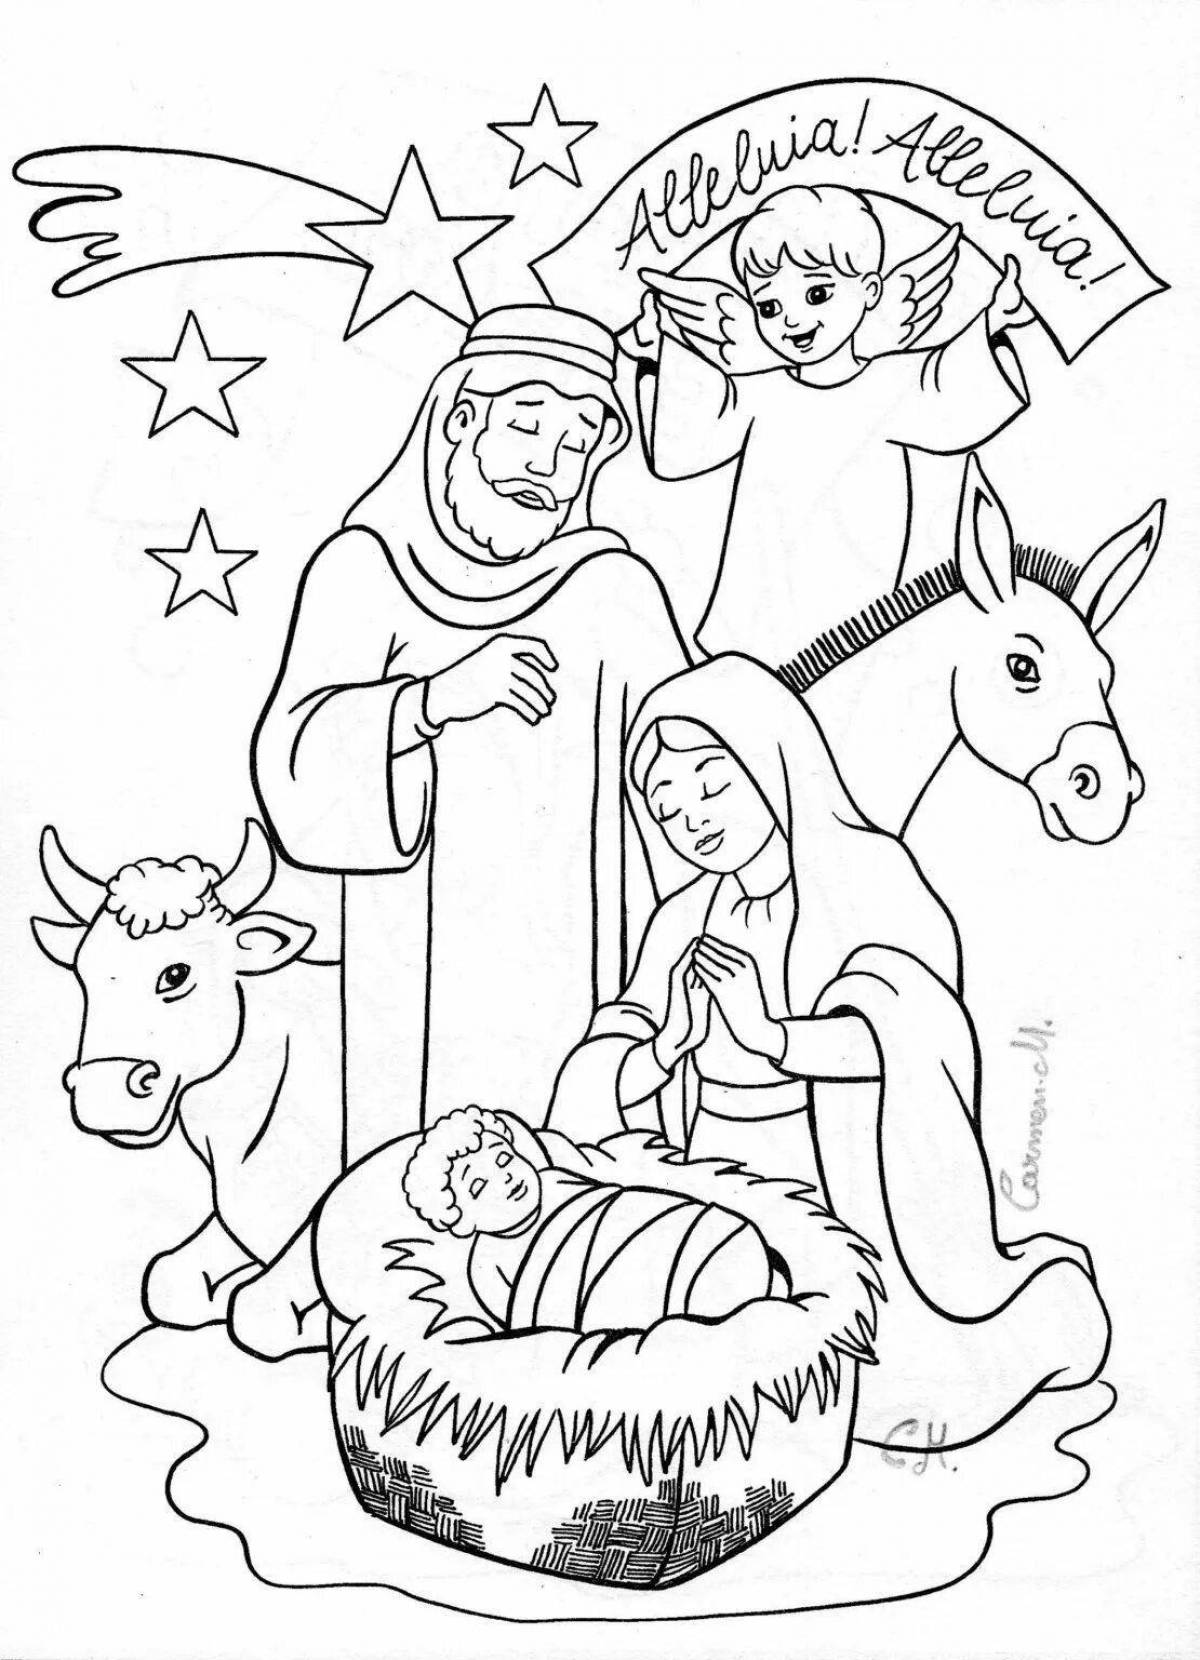 Animated Christmas coloring book for 3-4 year olds